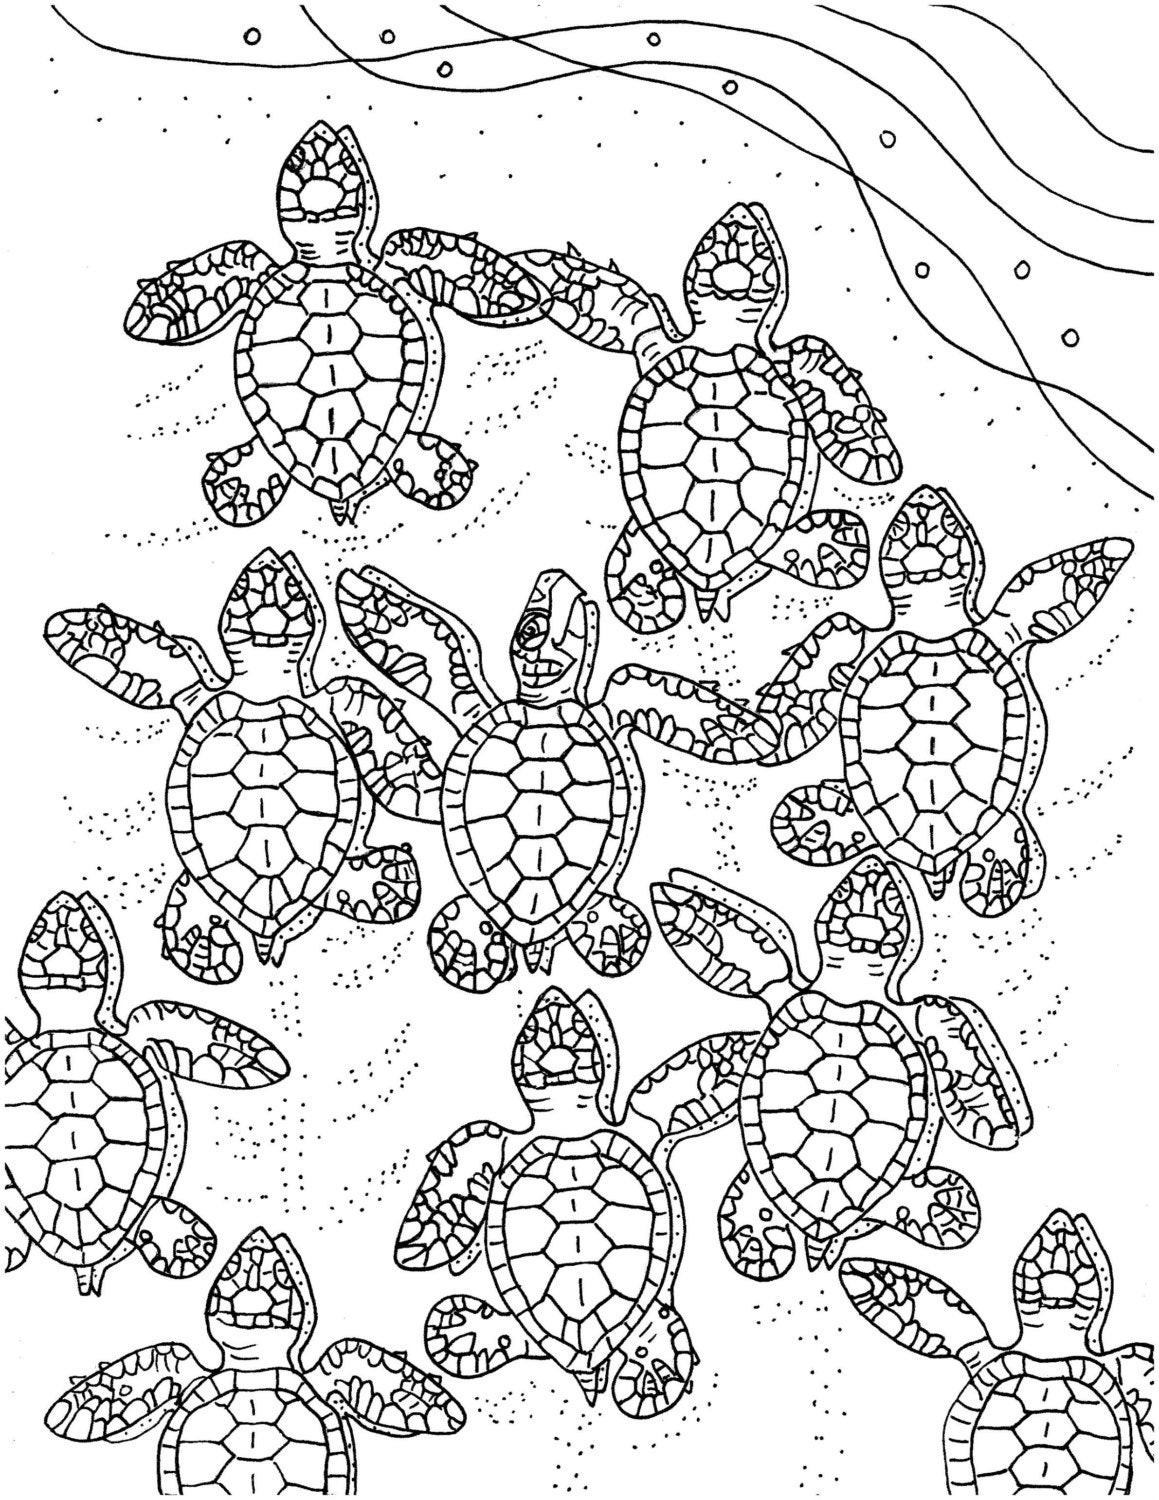 Baby Sea Turtle Coloring Pages
 Baby Sea Turtles coloring page embroidery pattern sea